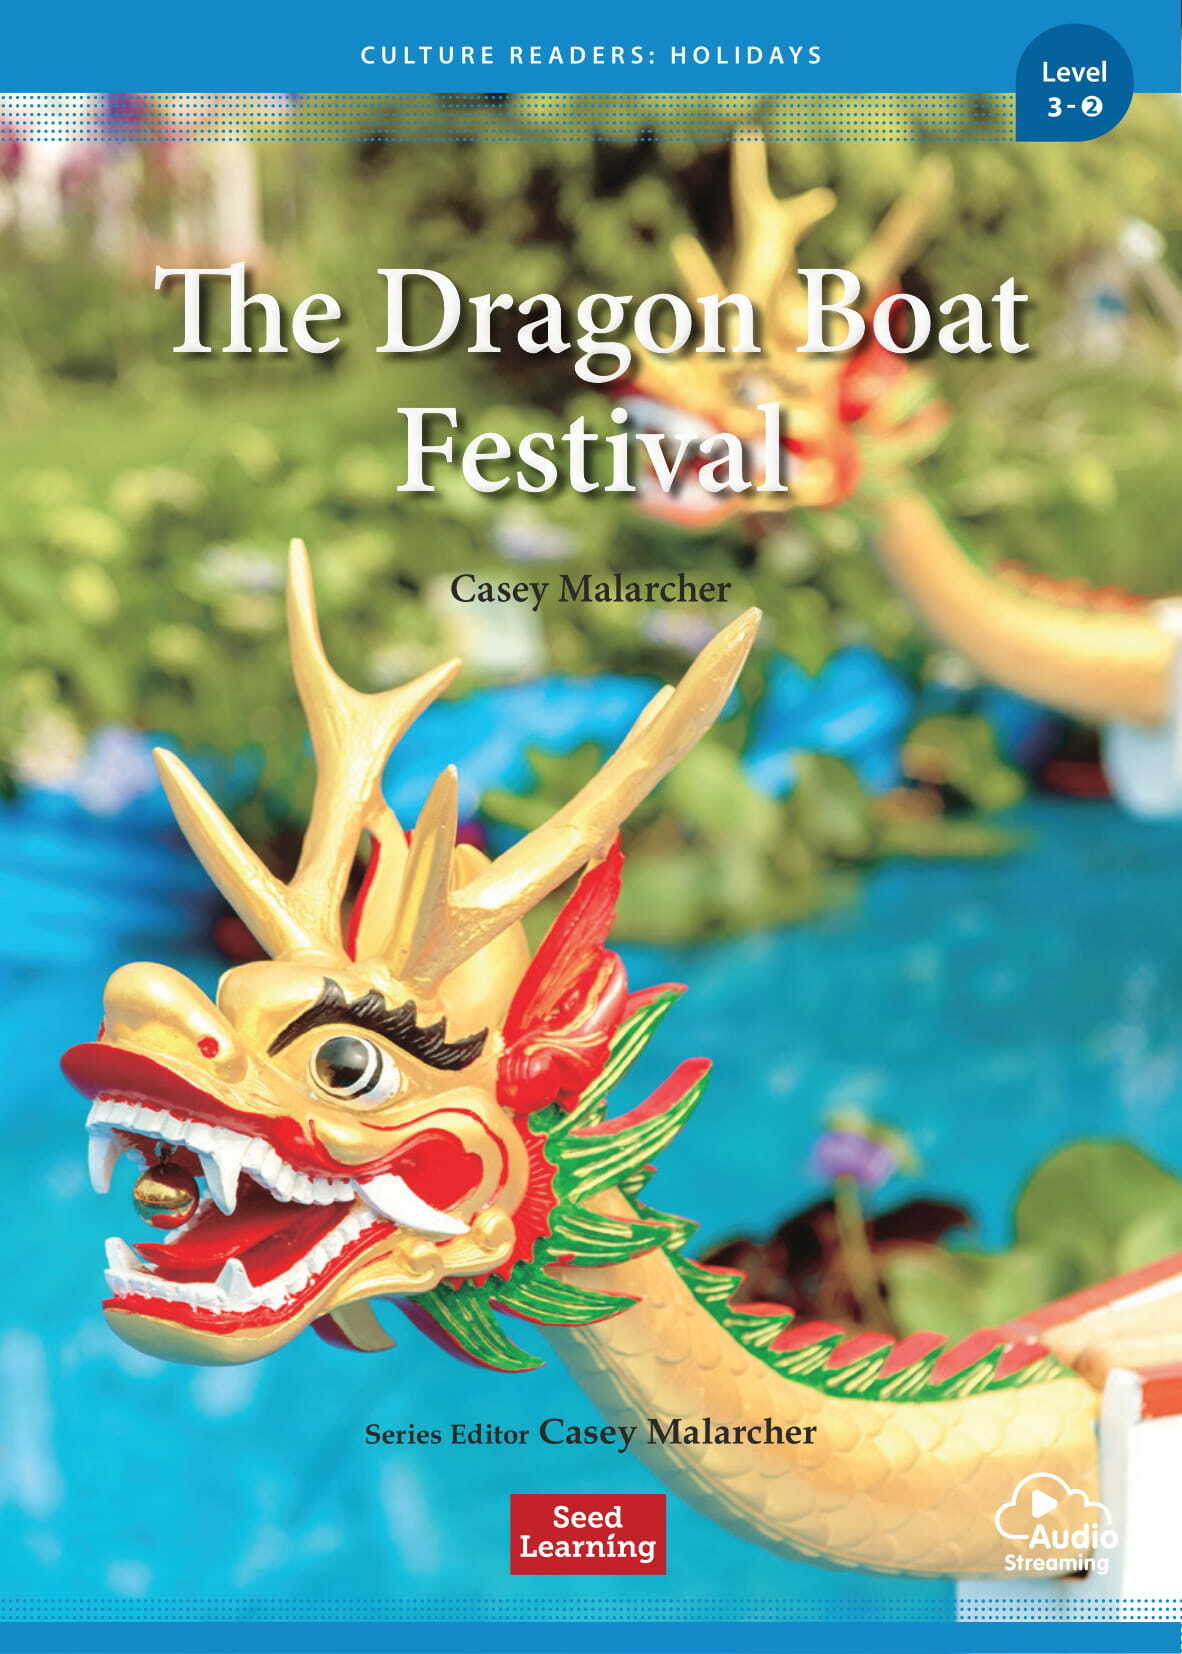 Culture Readers Holidays Level 3 : The Dragon Boat Festival (Story Book + Audio APP)